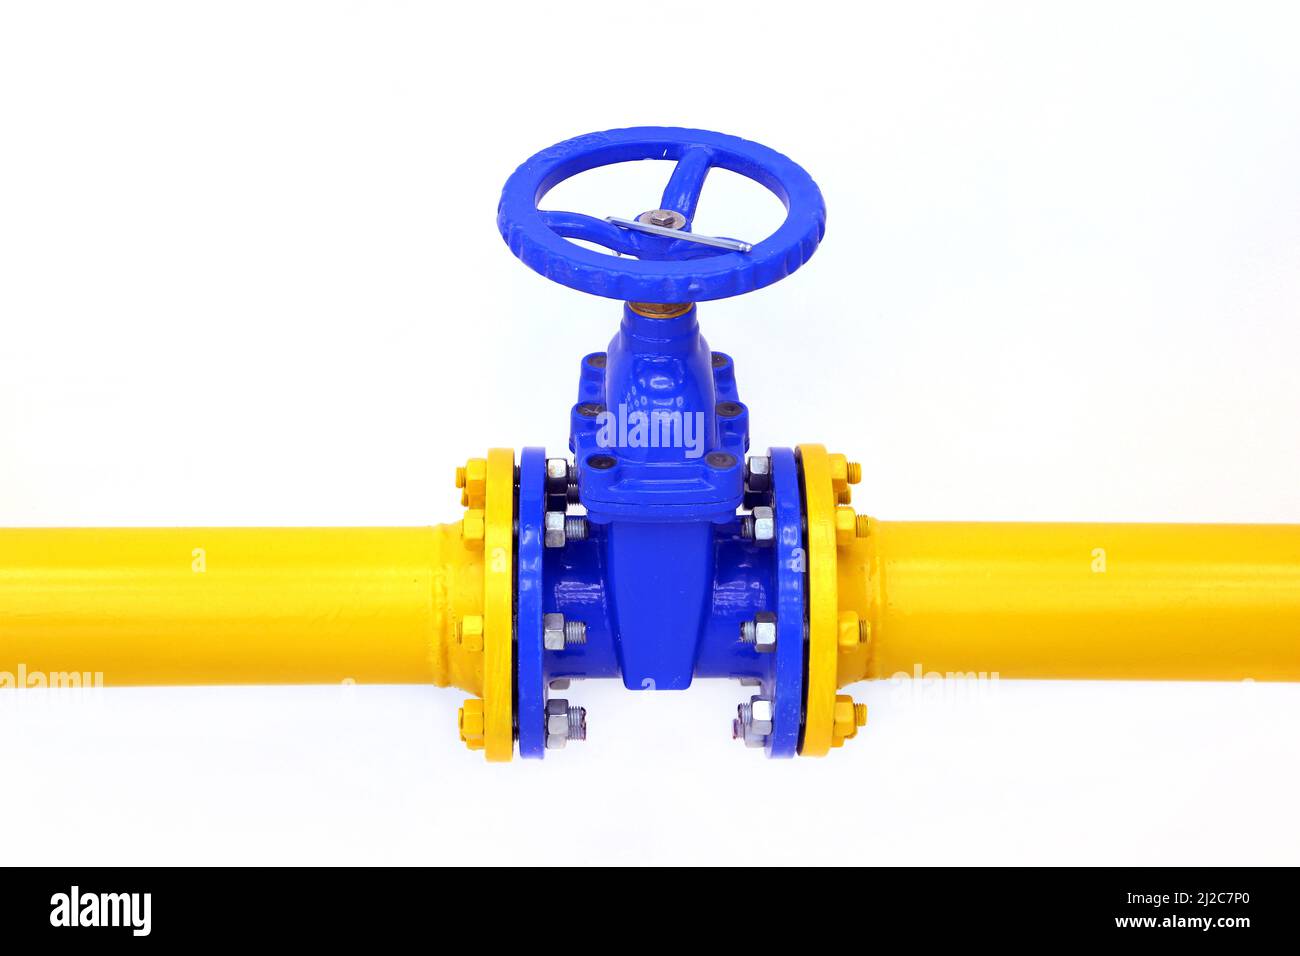 Pipeline with valve on white background. Yellow tube with blue crane, oil and gas industry Stock Photo